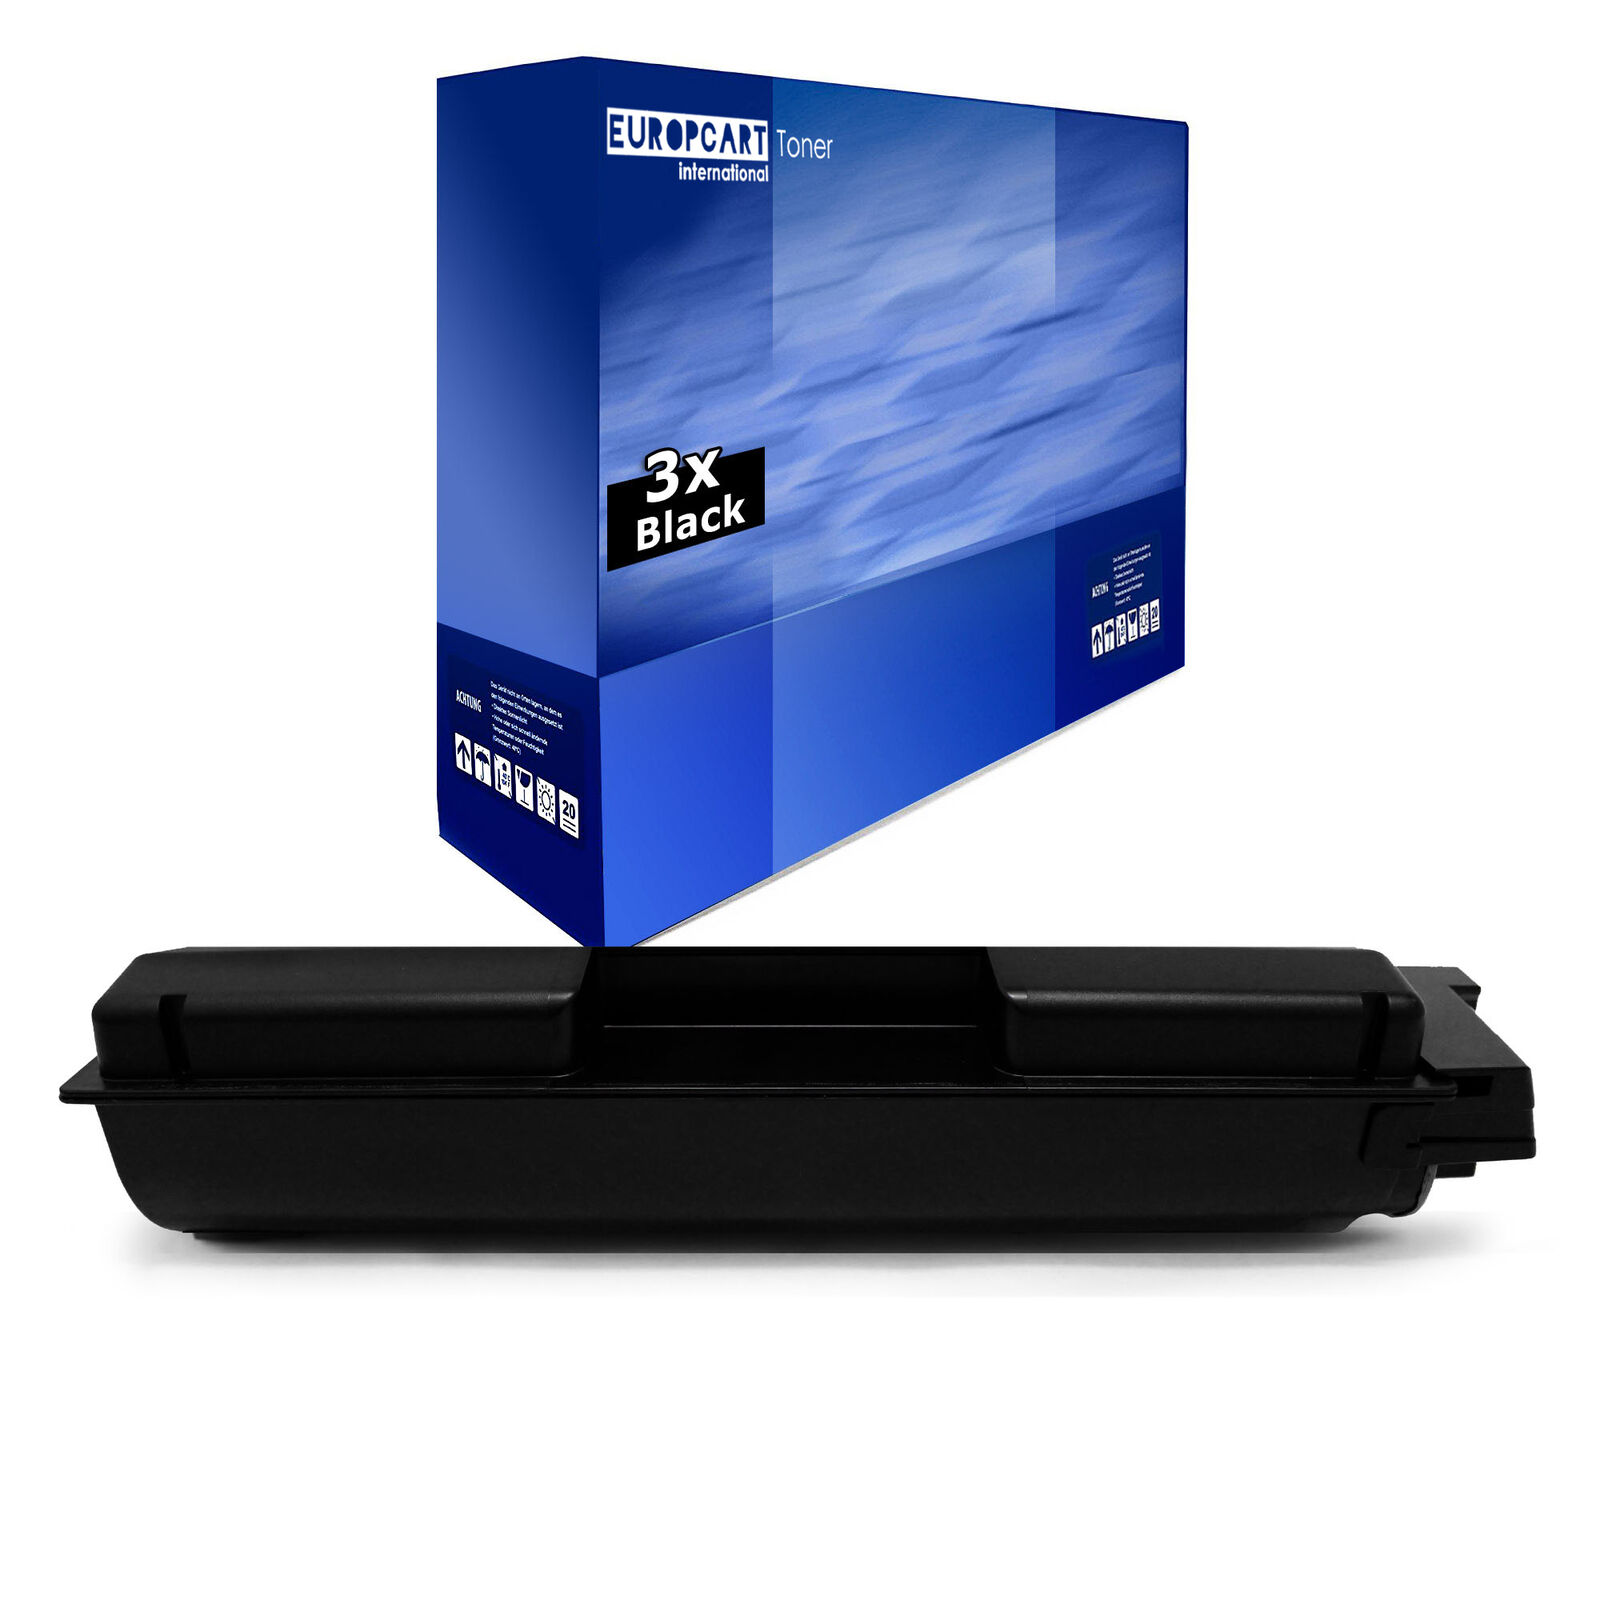 3x Europcart Toner Black for Kyocera Ecosys P-7240-cdn P 7240 17.000 Pages